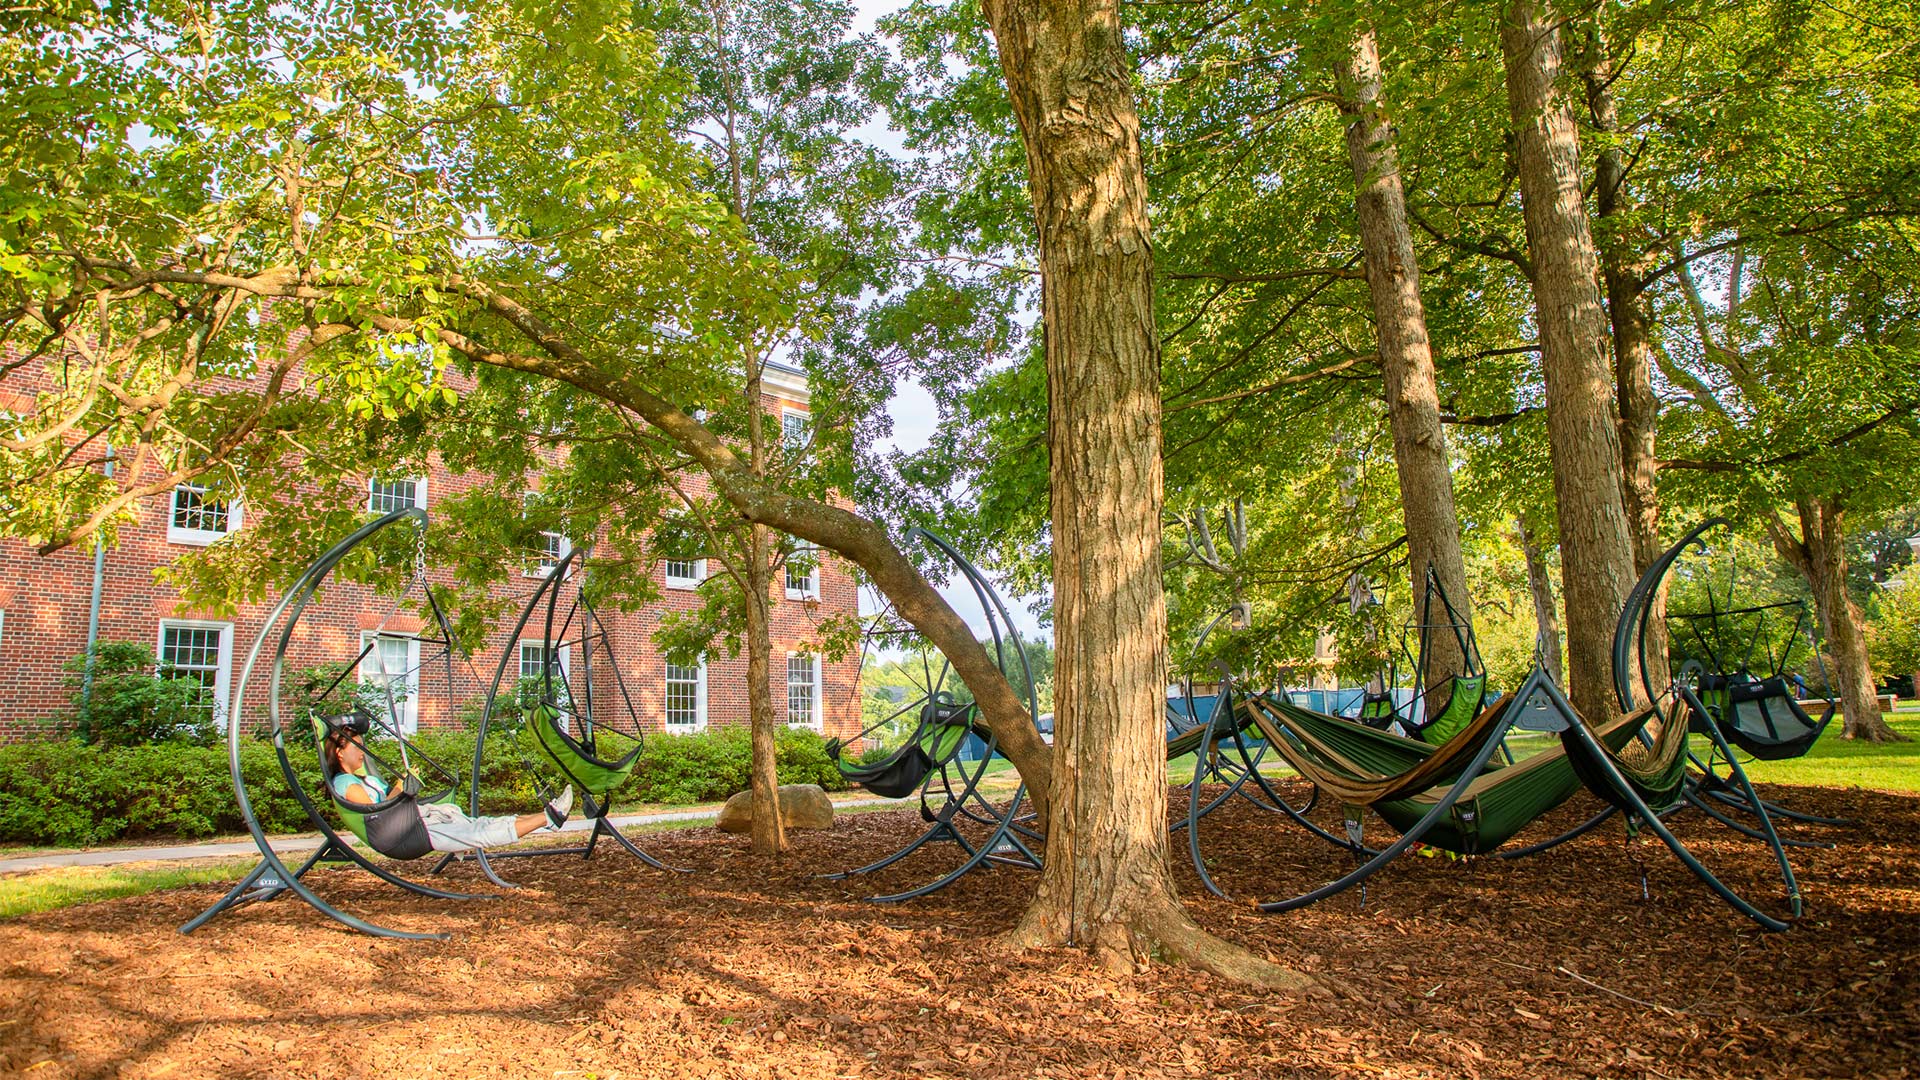 Lounging area with hammocks shown outside Milner Hall.